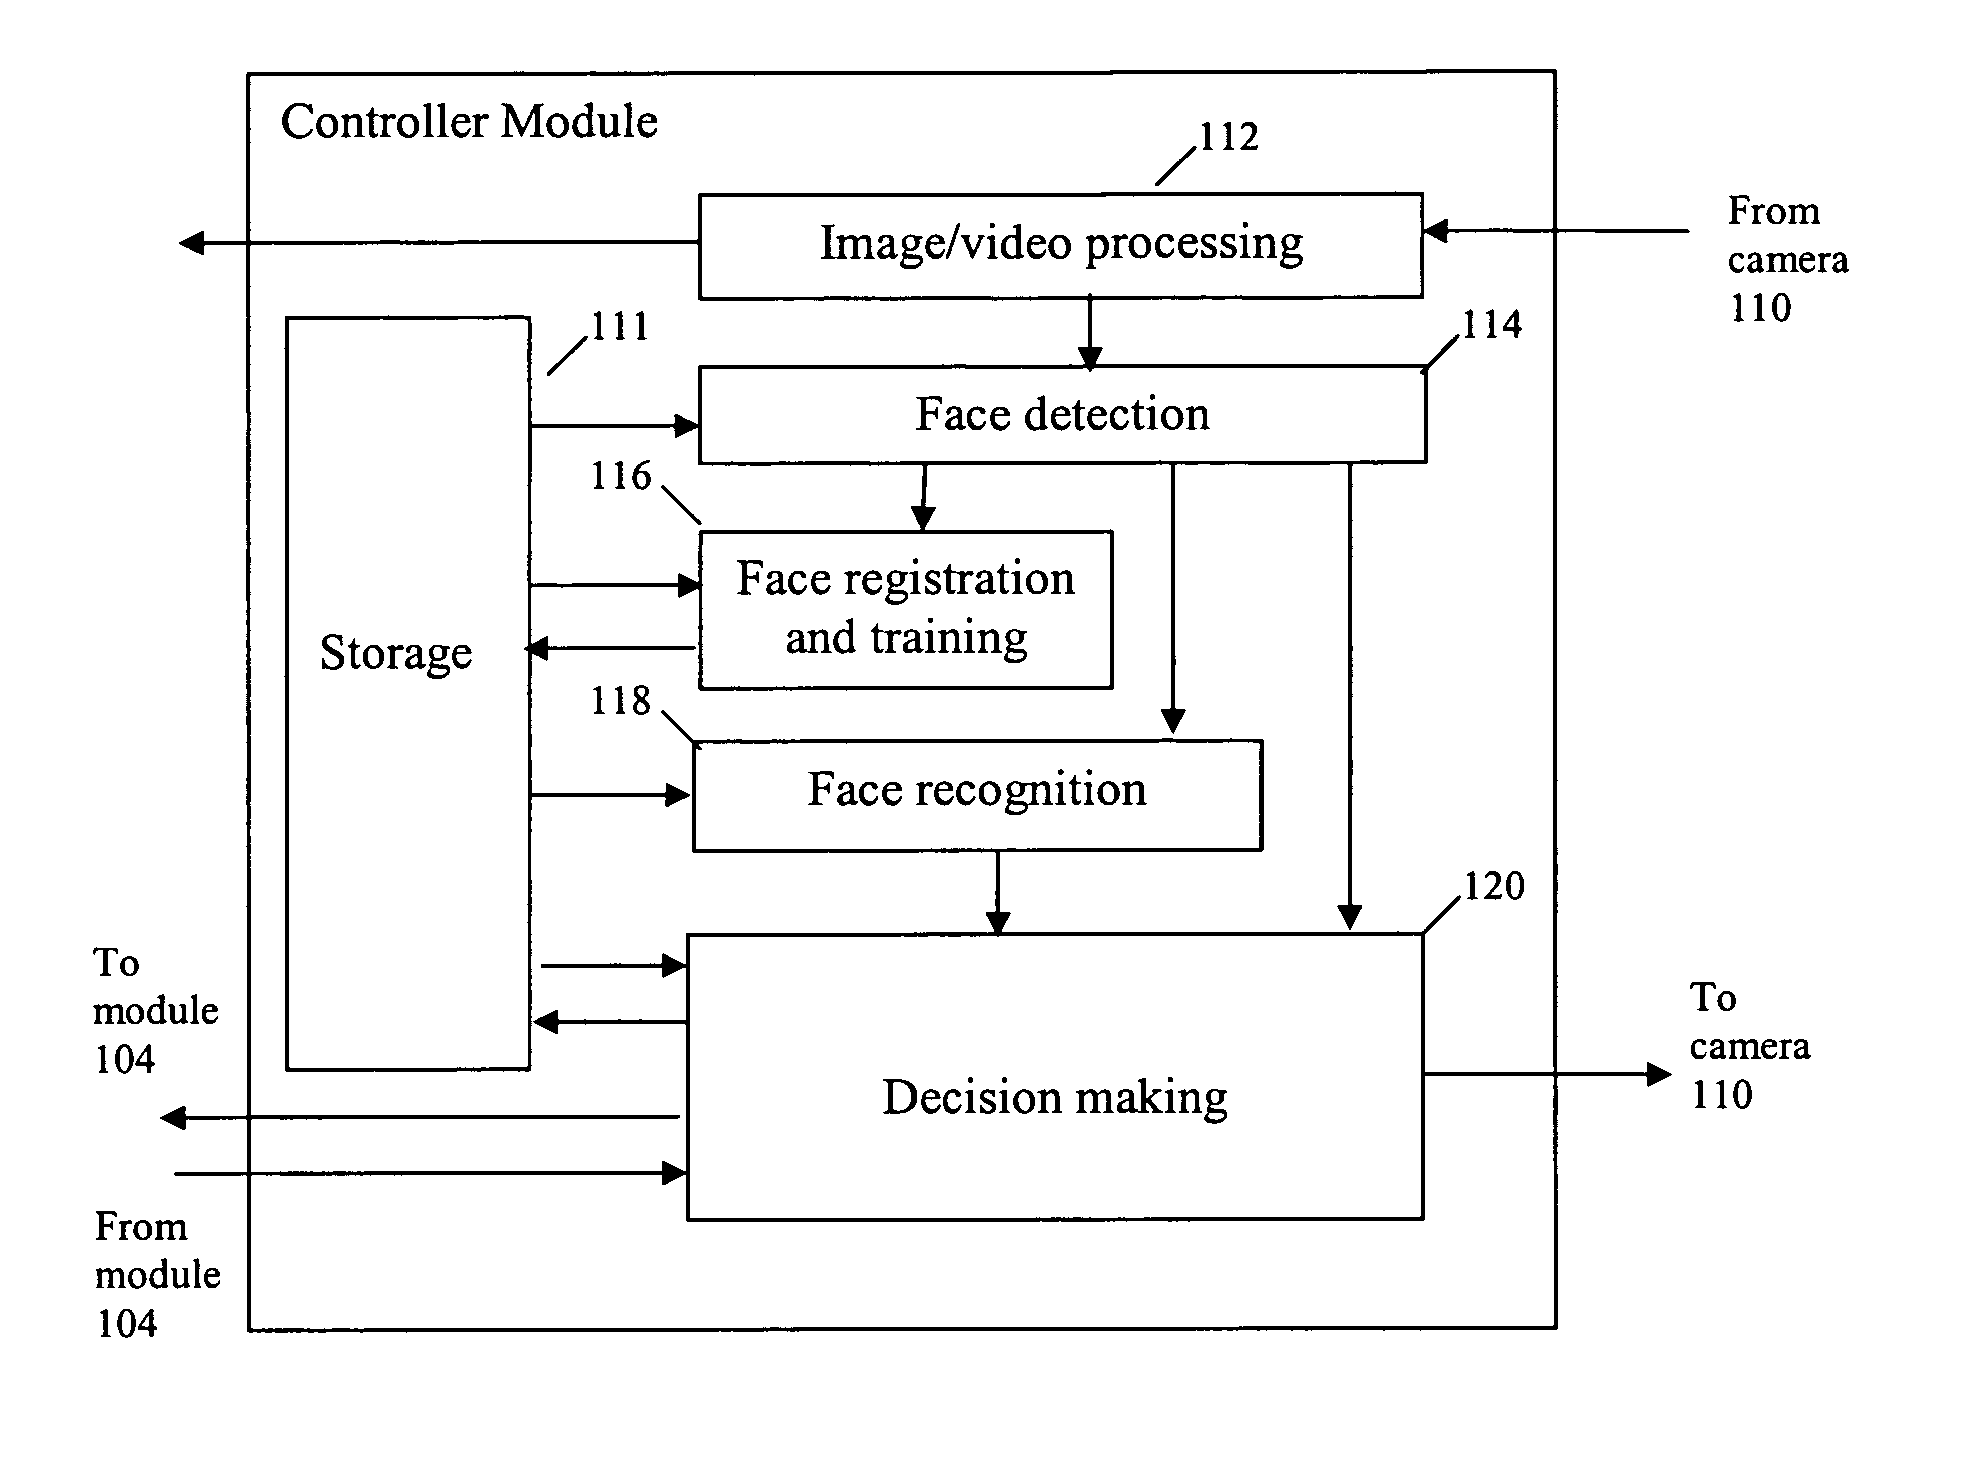 Personal settings, parental control, and energy saving control of television with digital video camera